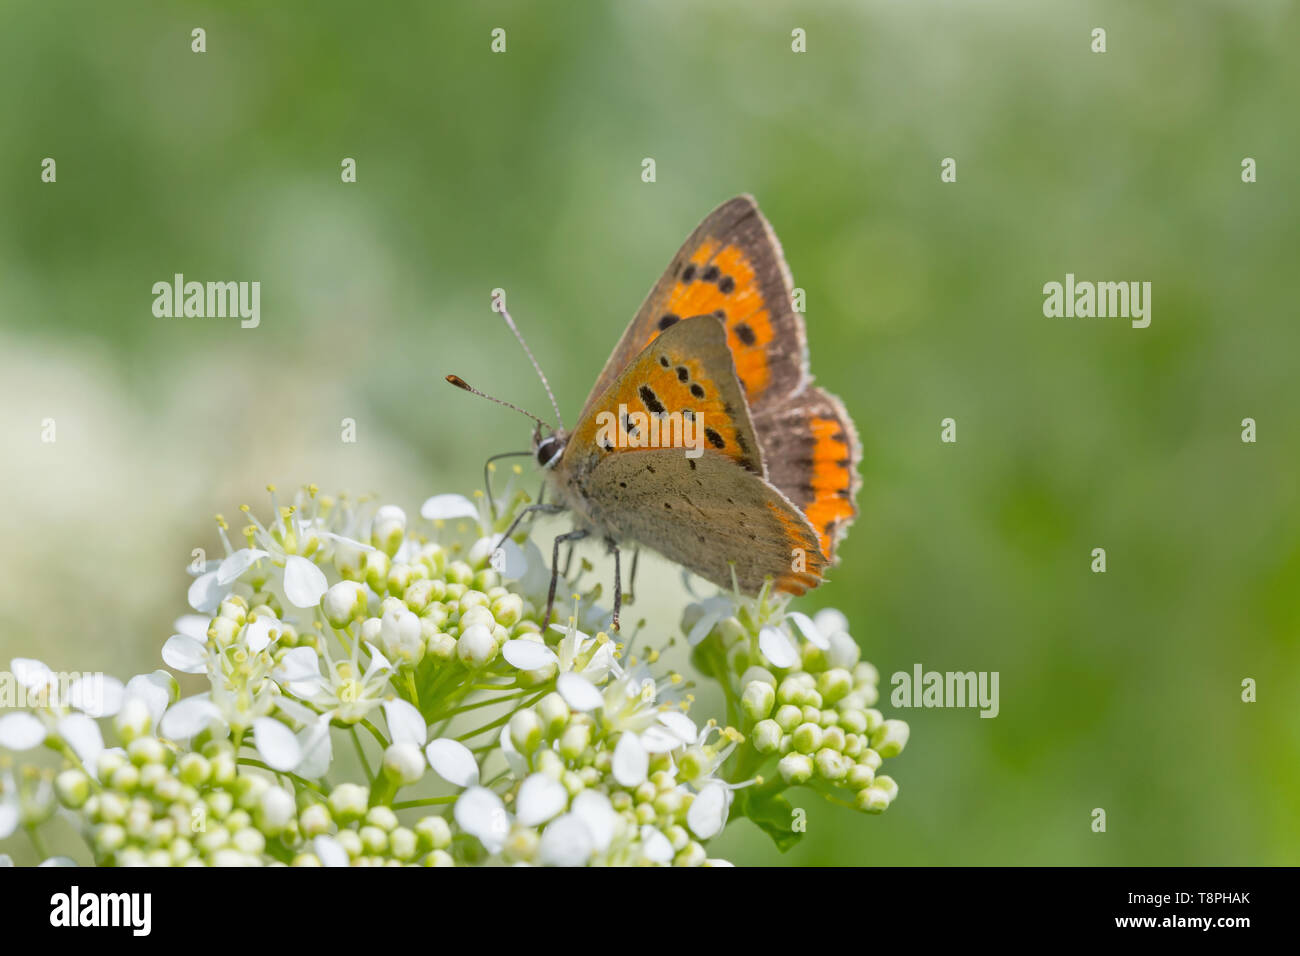 brown butterfly sitting on wild white flower in green grass Stock Photo